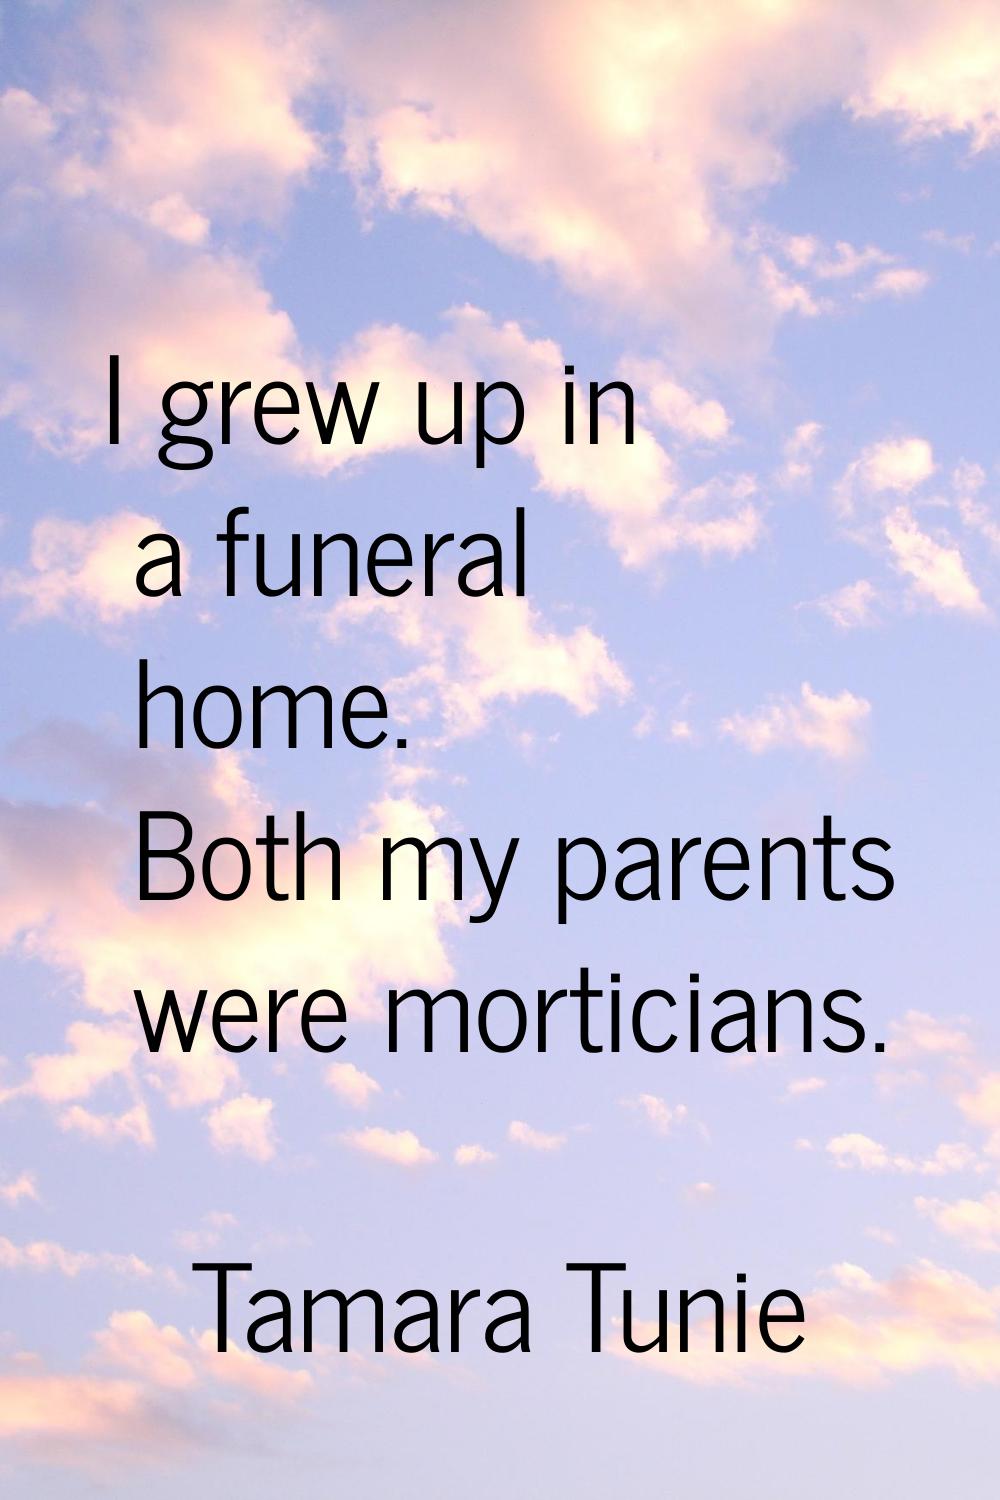 I grew up in a funeral home. Both my parents were morticians.